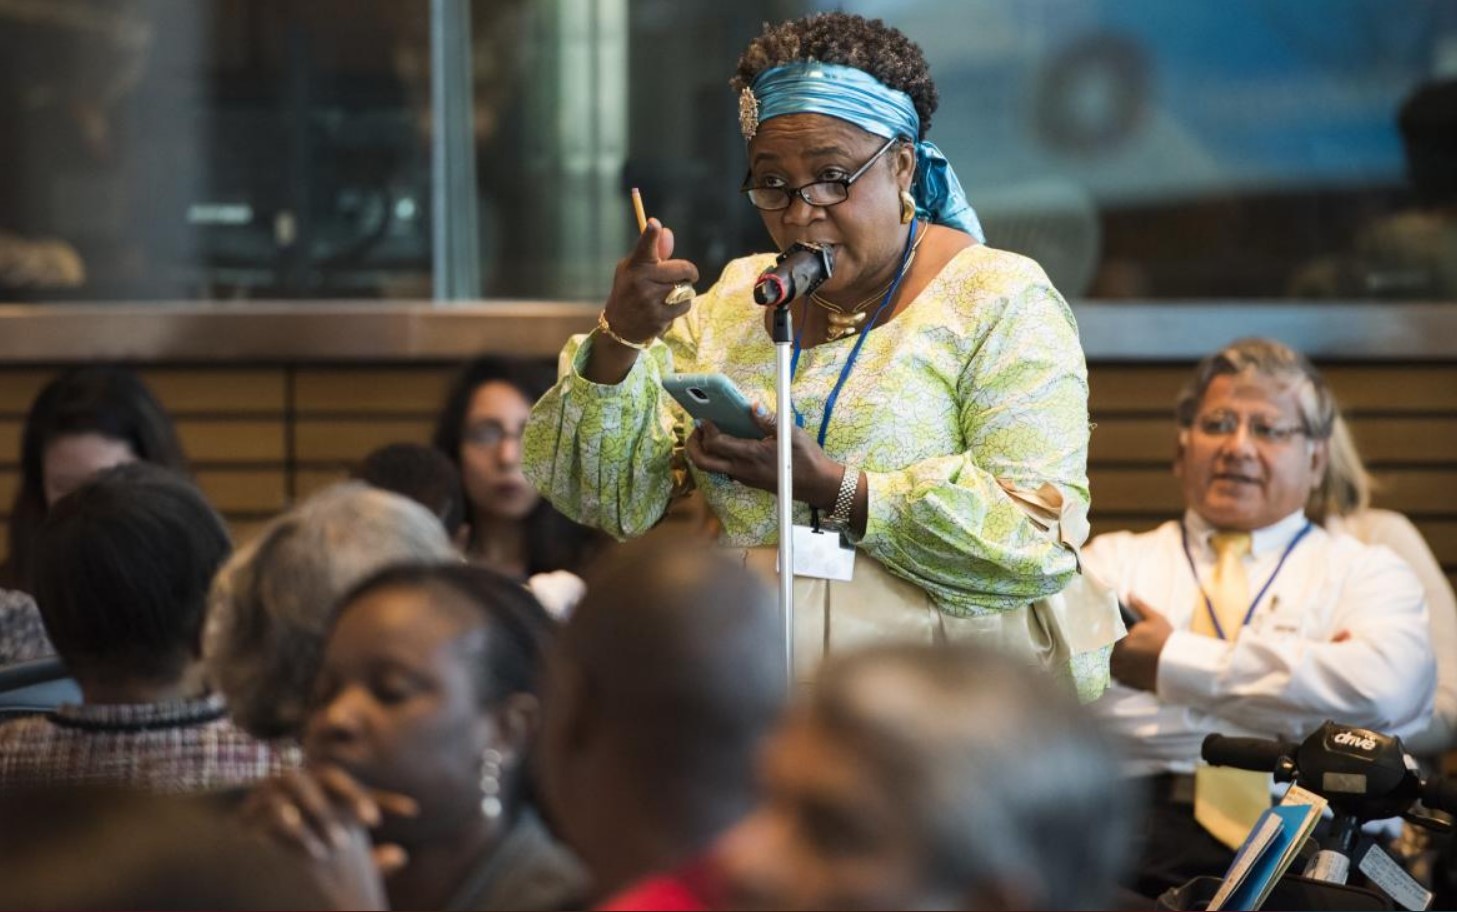 A woman speaking at the civil society roundtable during the World Bank / IMF 2017 Spring Meetings. Washington, DC, April 18, 2017. Credit: World Bank/Grant Ellis